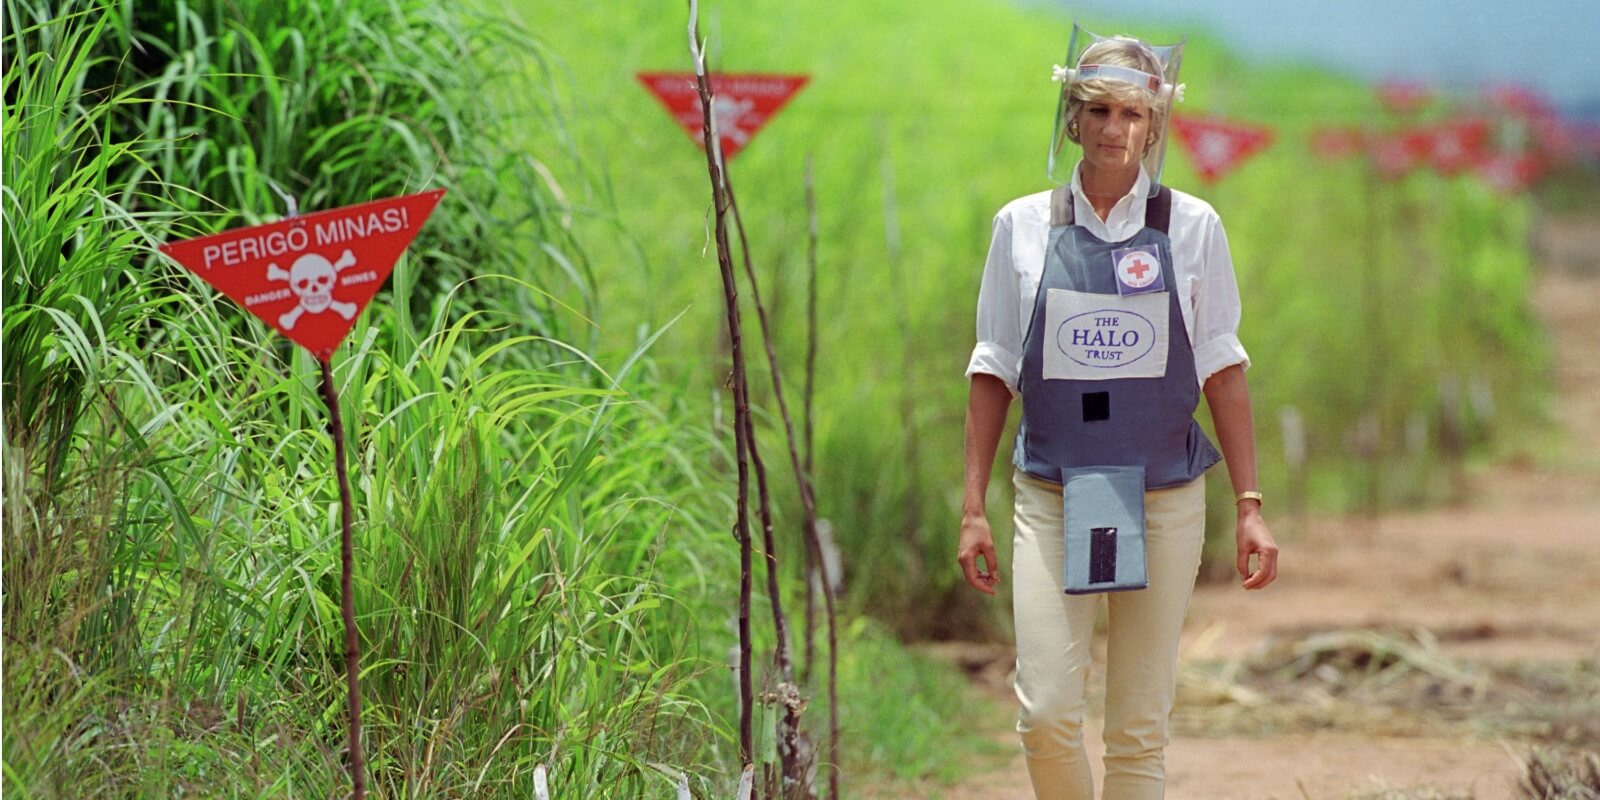 Princess Diana draws attention to the problem of landmines in Africa.